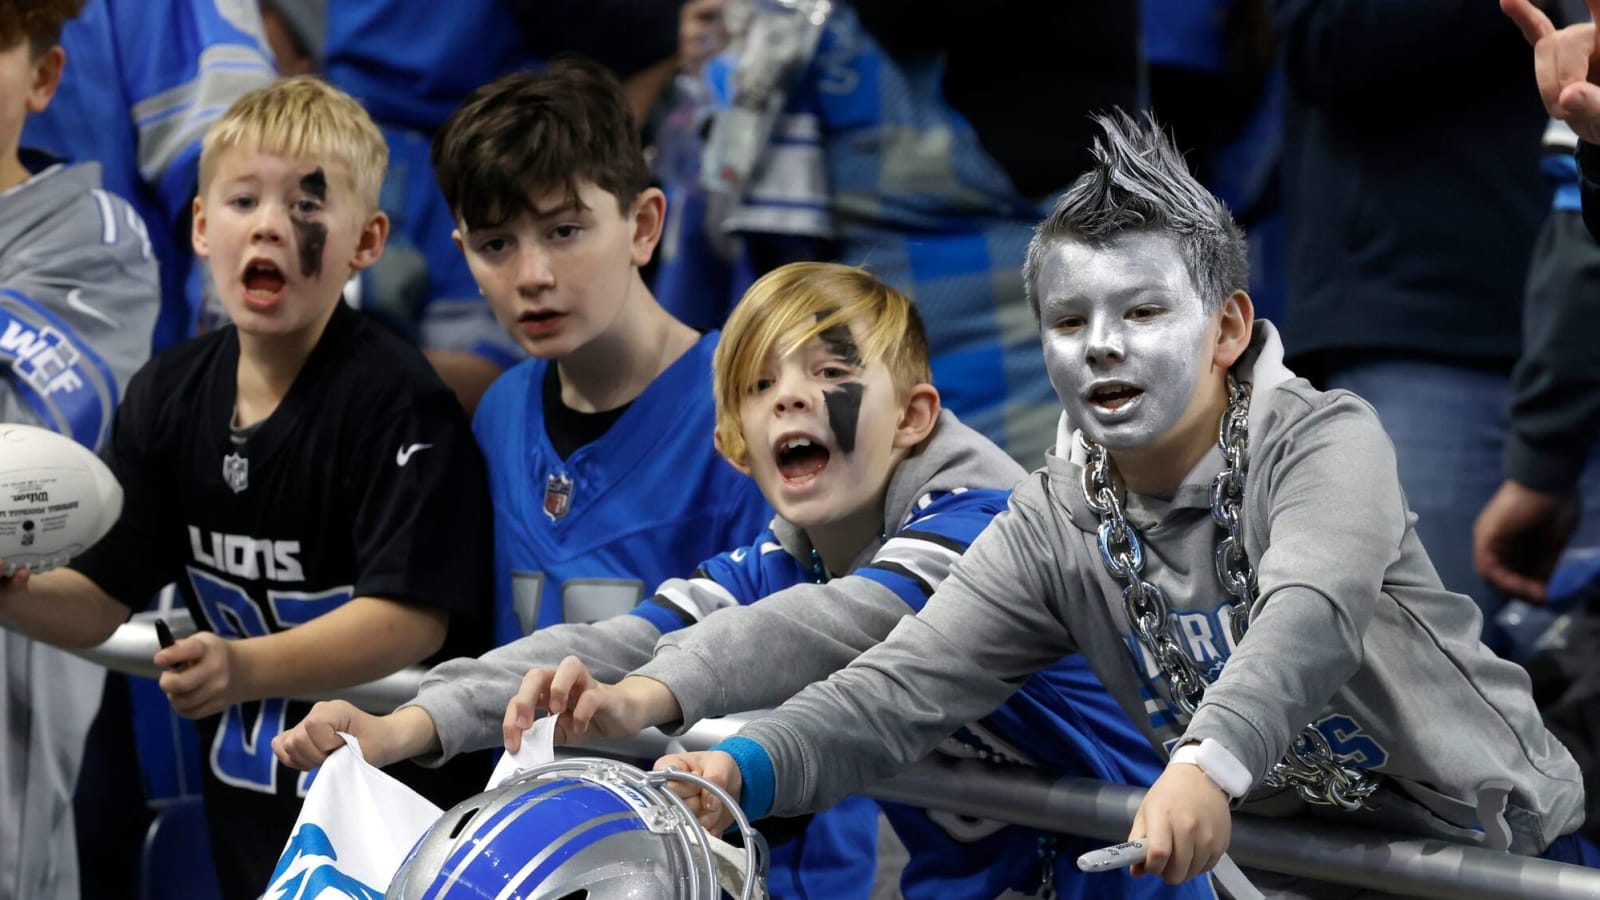 Watch: Lions fans packed Ford Field to watch NFC title game